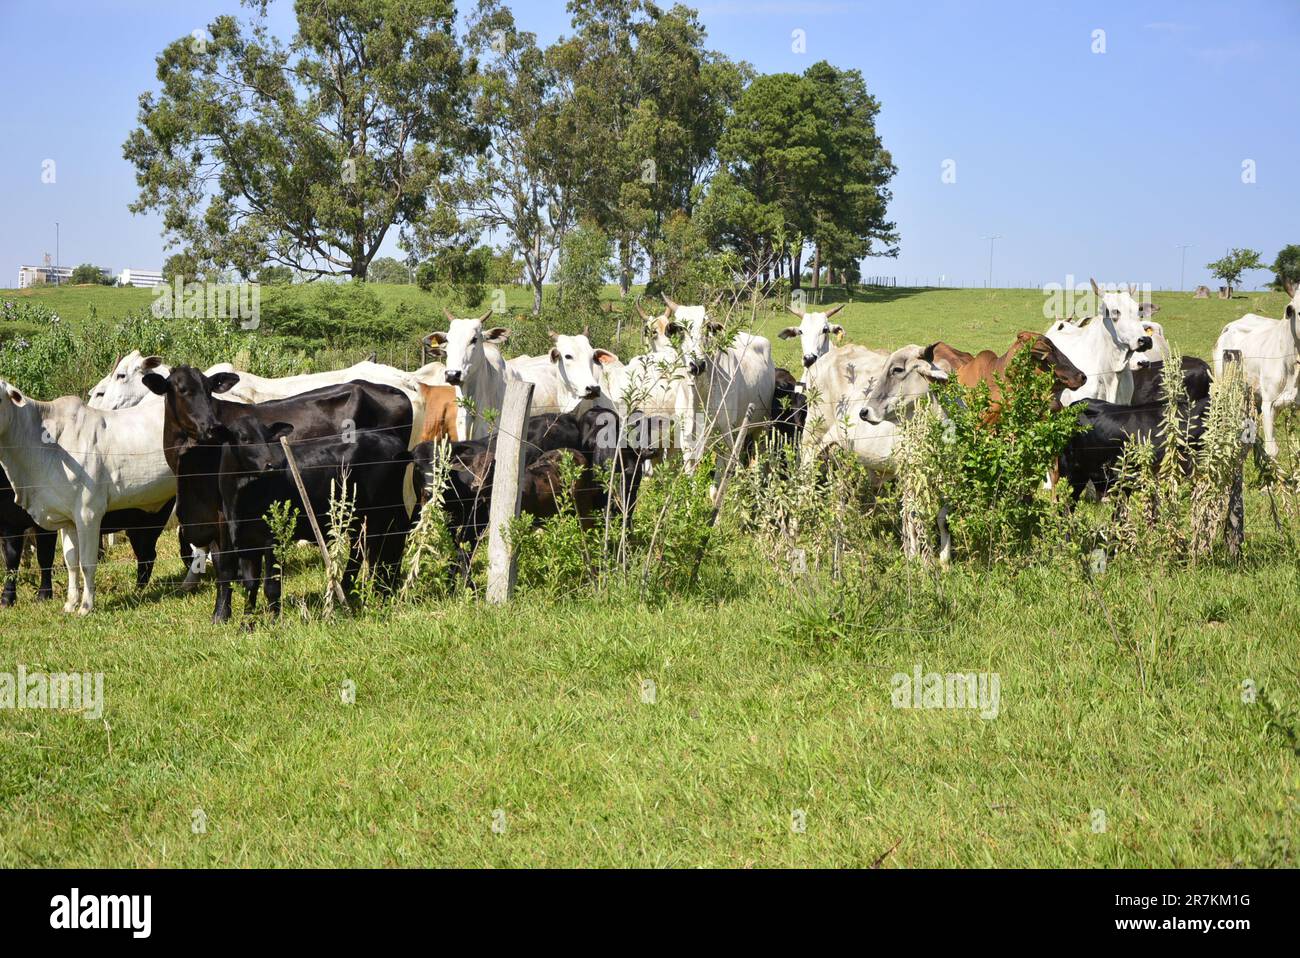 Pasture with cattle of various breeds in a cattle ranch with nature and buildings in the background Stock Photo